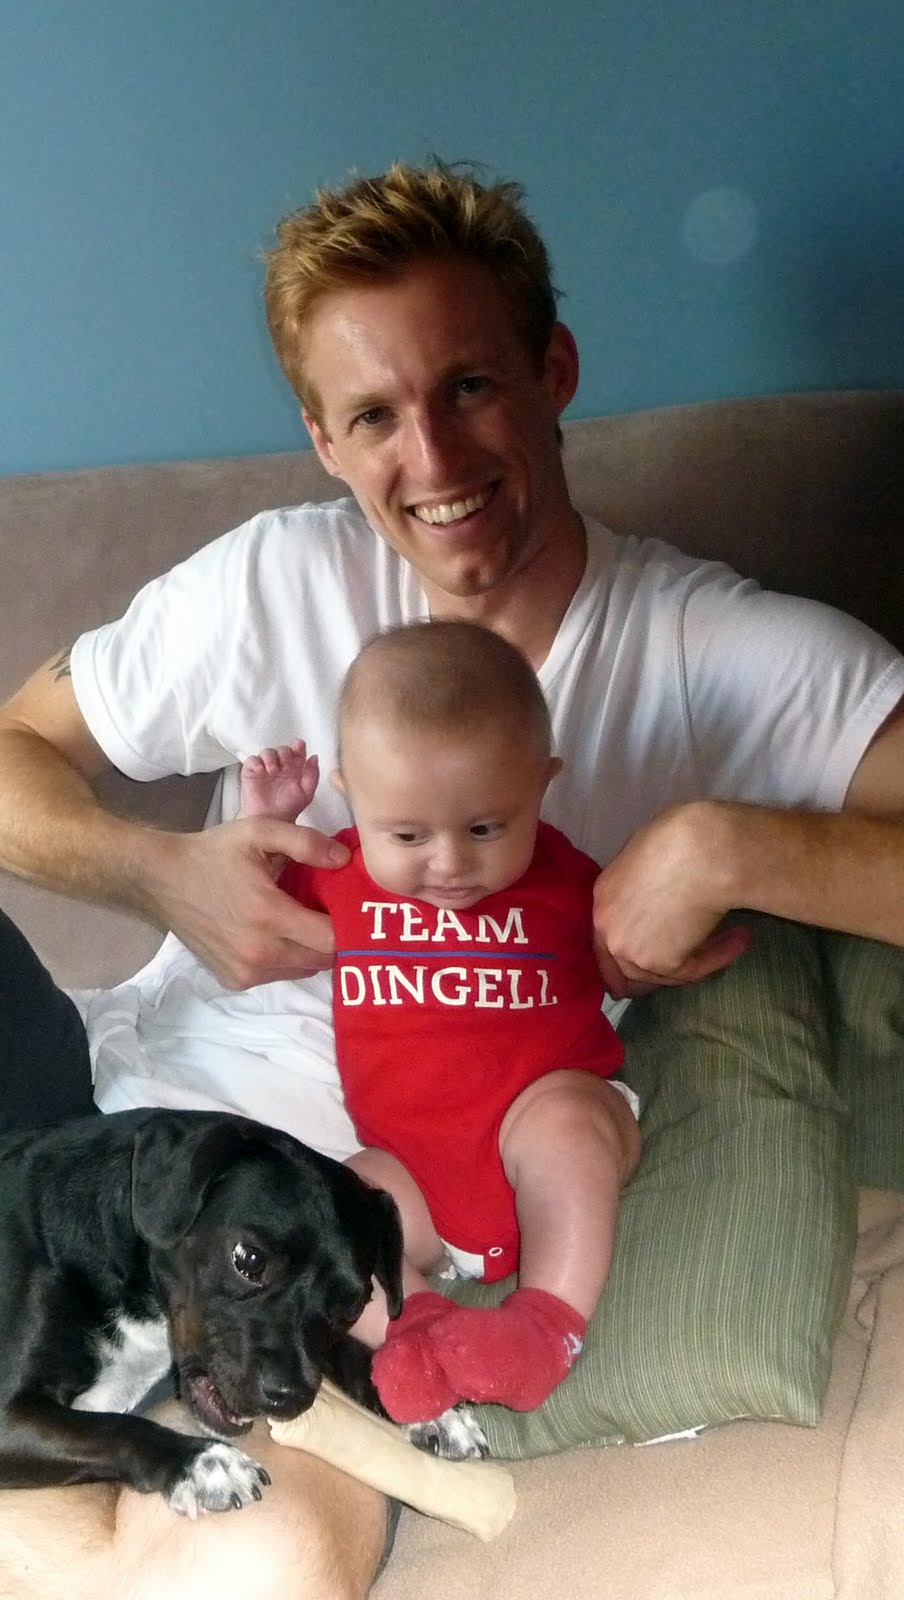 ... : Jack celebrates Team Dingell with his dad on Michael's last day